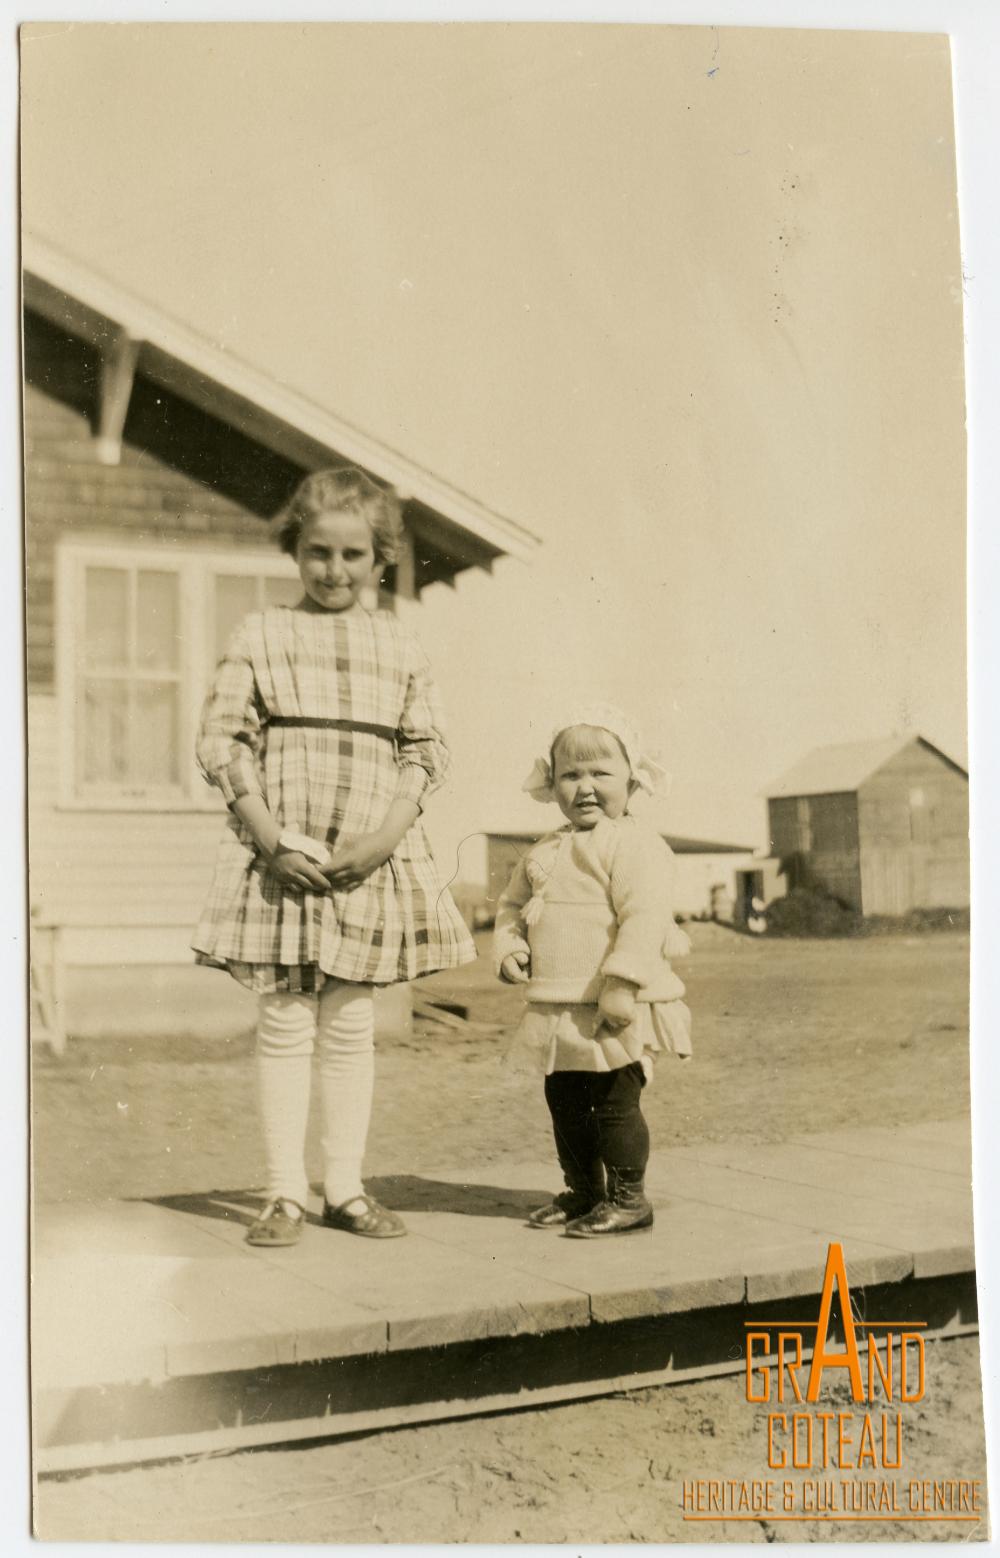 Photographic Print, 2 young children standing on a wooden sidewalk